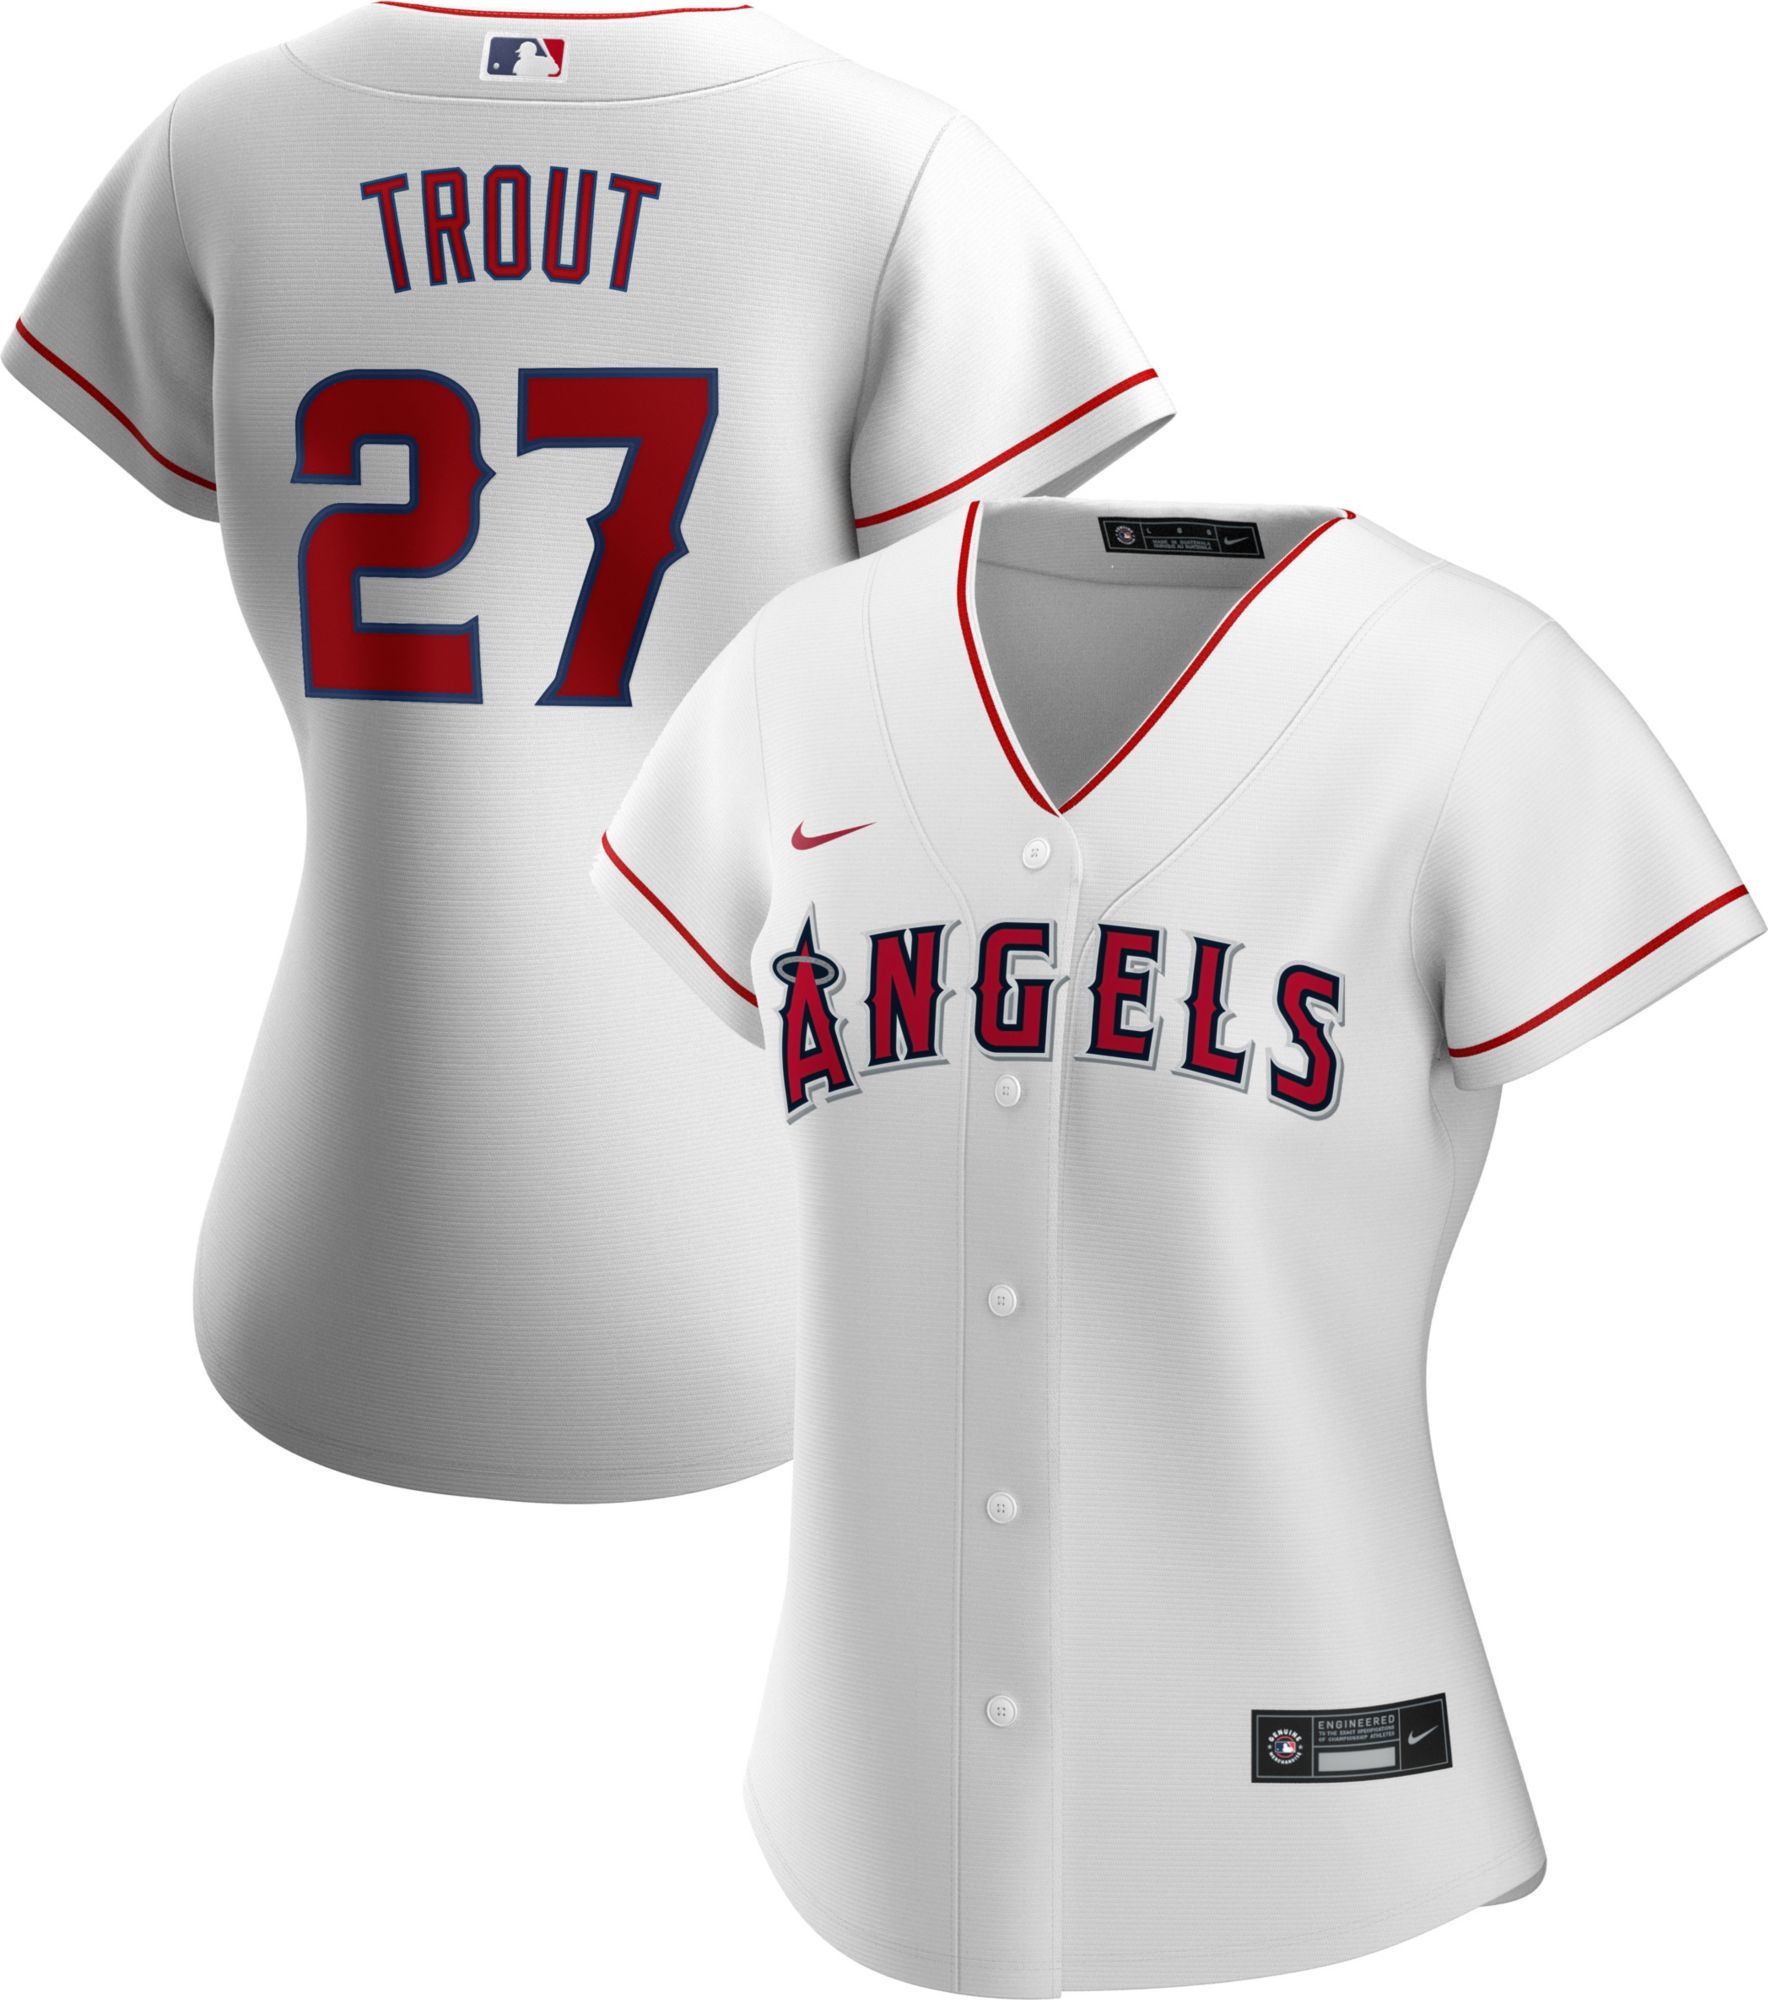 Los Angeles Angels Mike Trout #27 